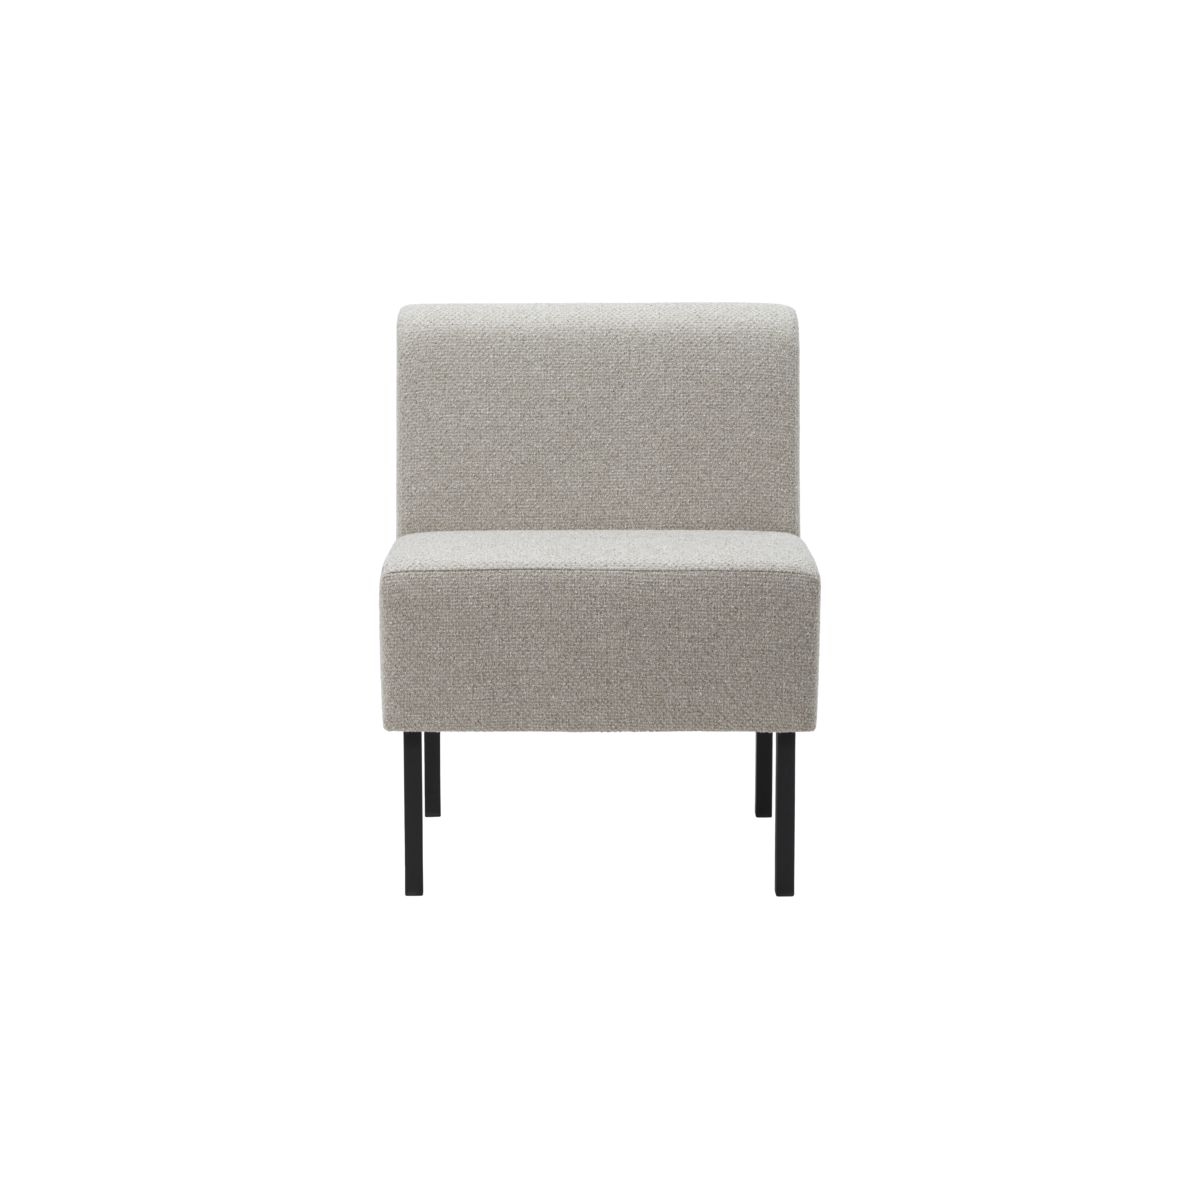 Soffa, HD1 seater, Natur House Doctor